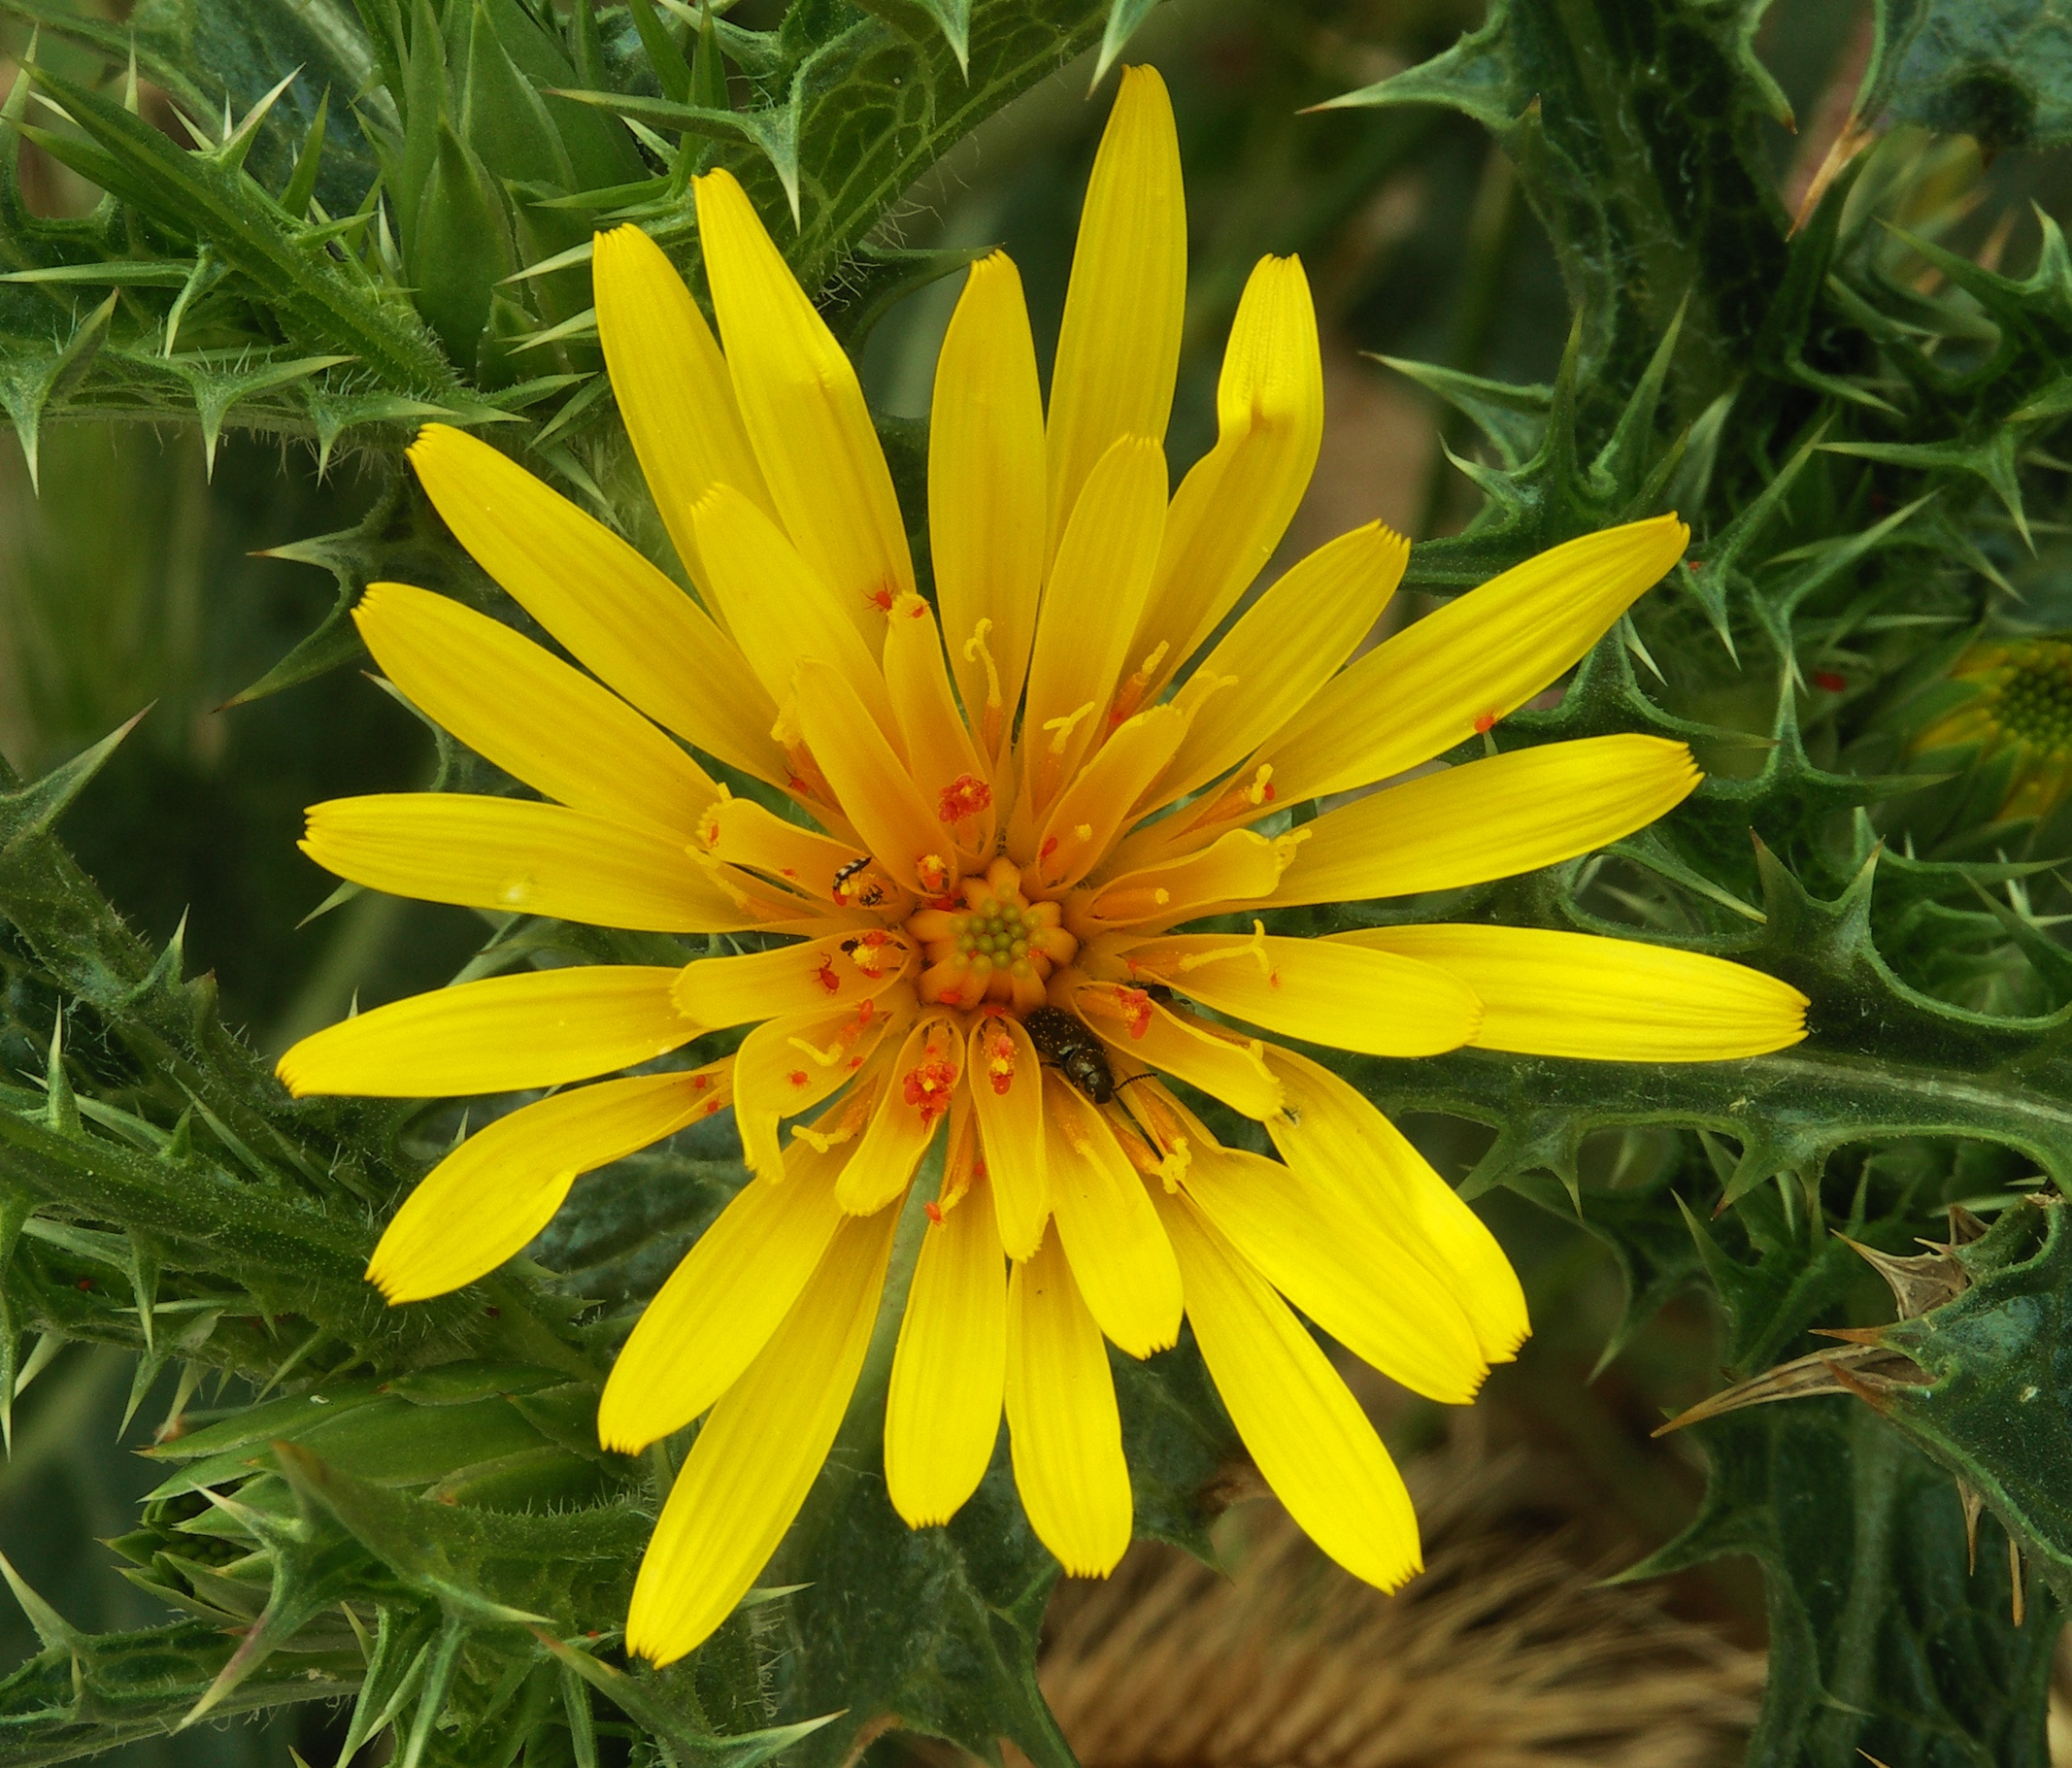 Yellow flower with critters